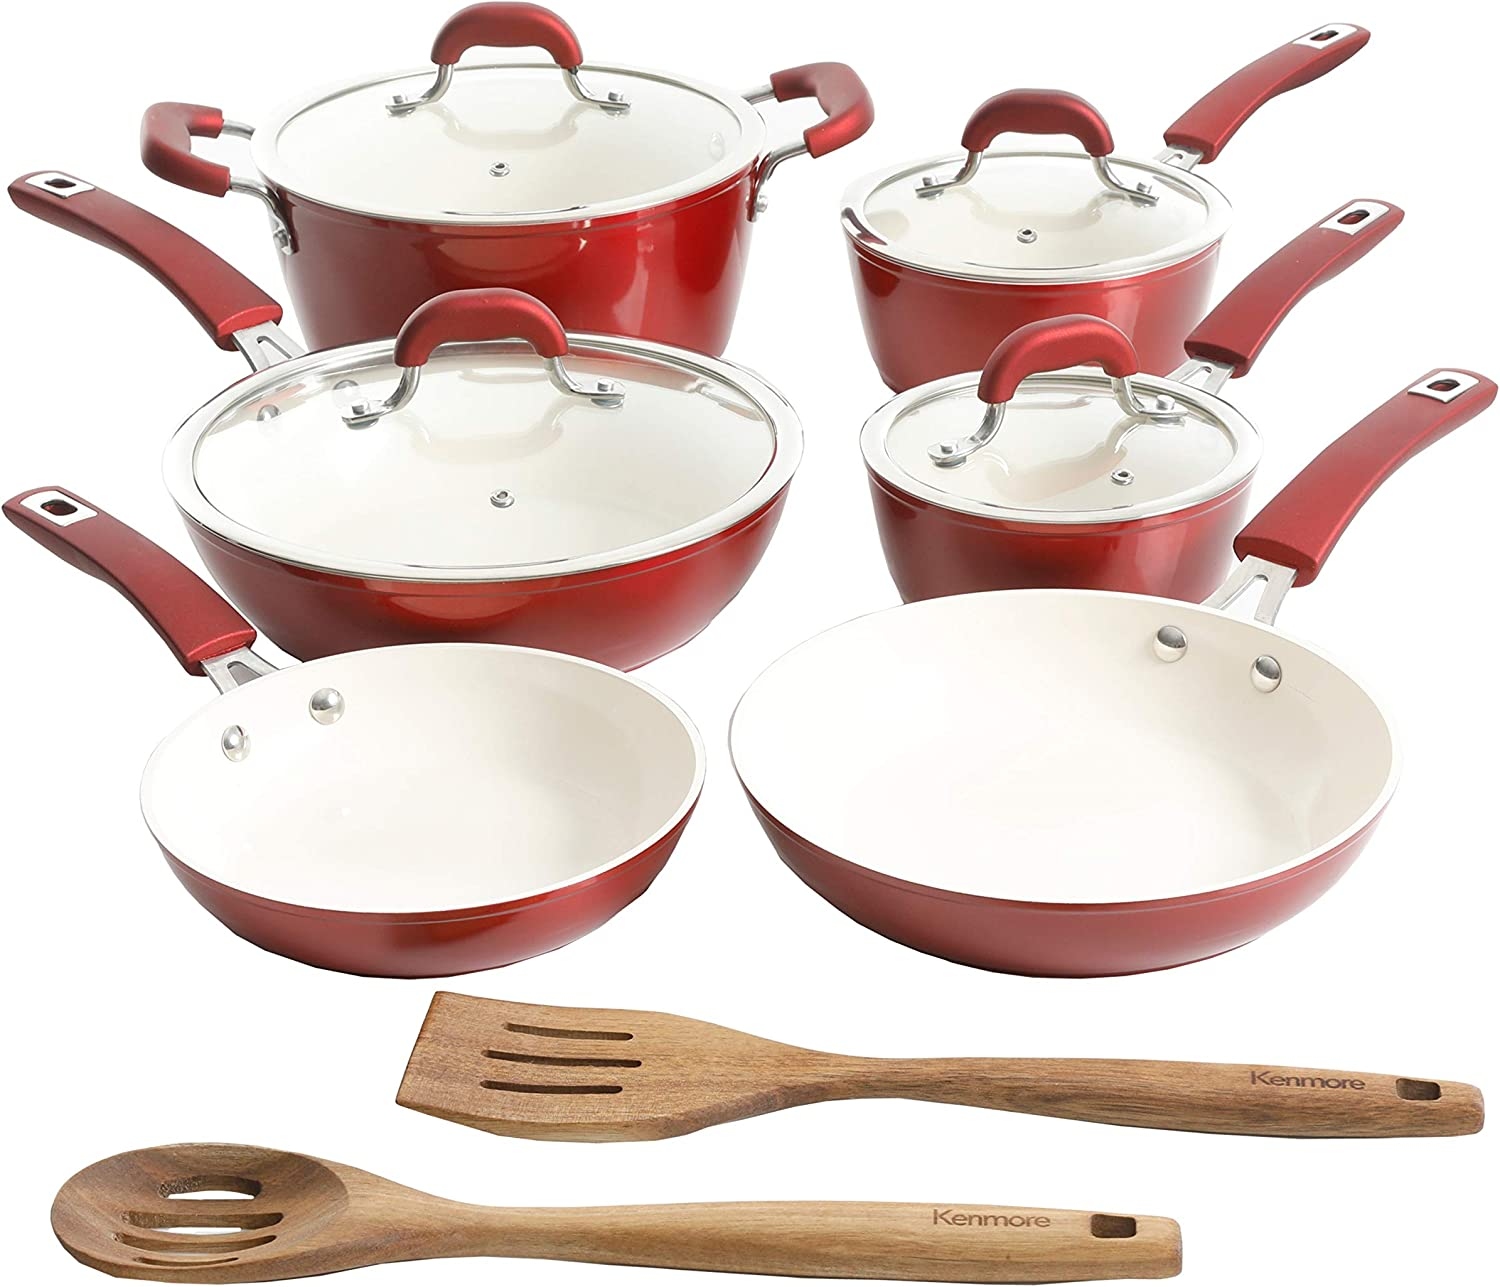 12-Piece Kenmore Arlington Healthy Nonstick Ceramic Coated Forged Aluminum Induction Cookware (Metallic Red) $78.80